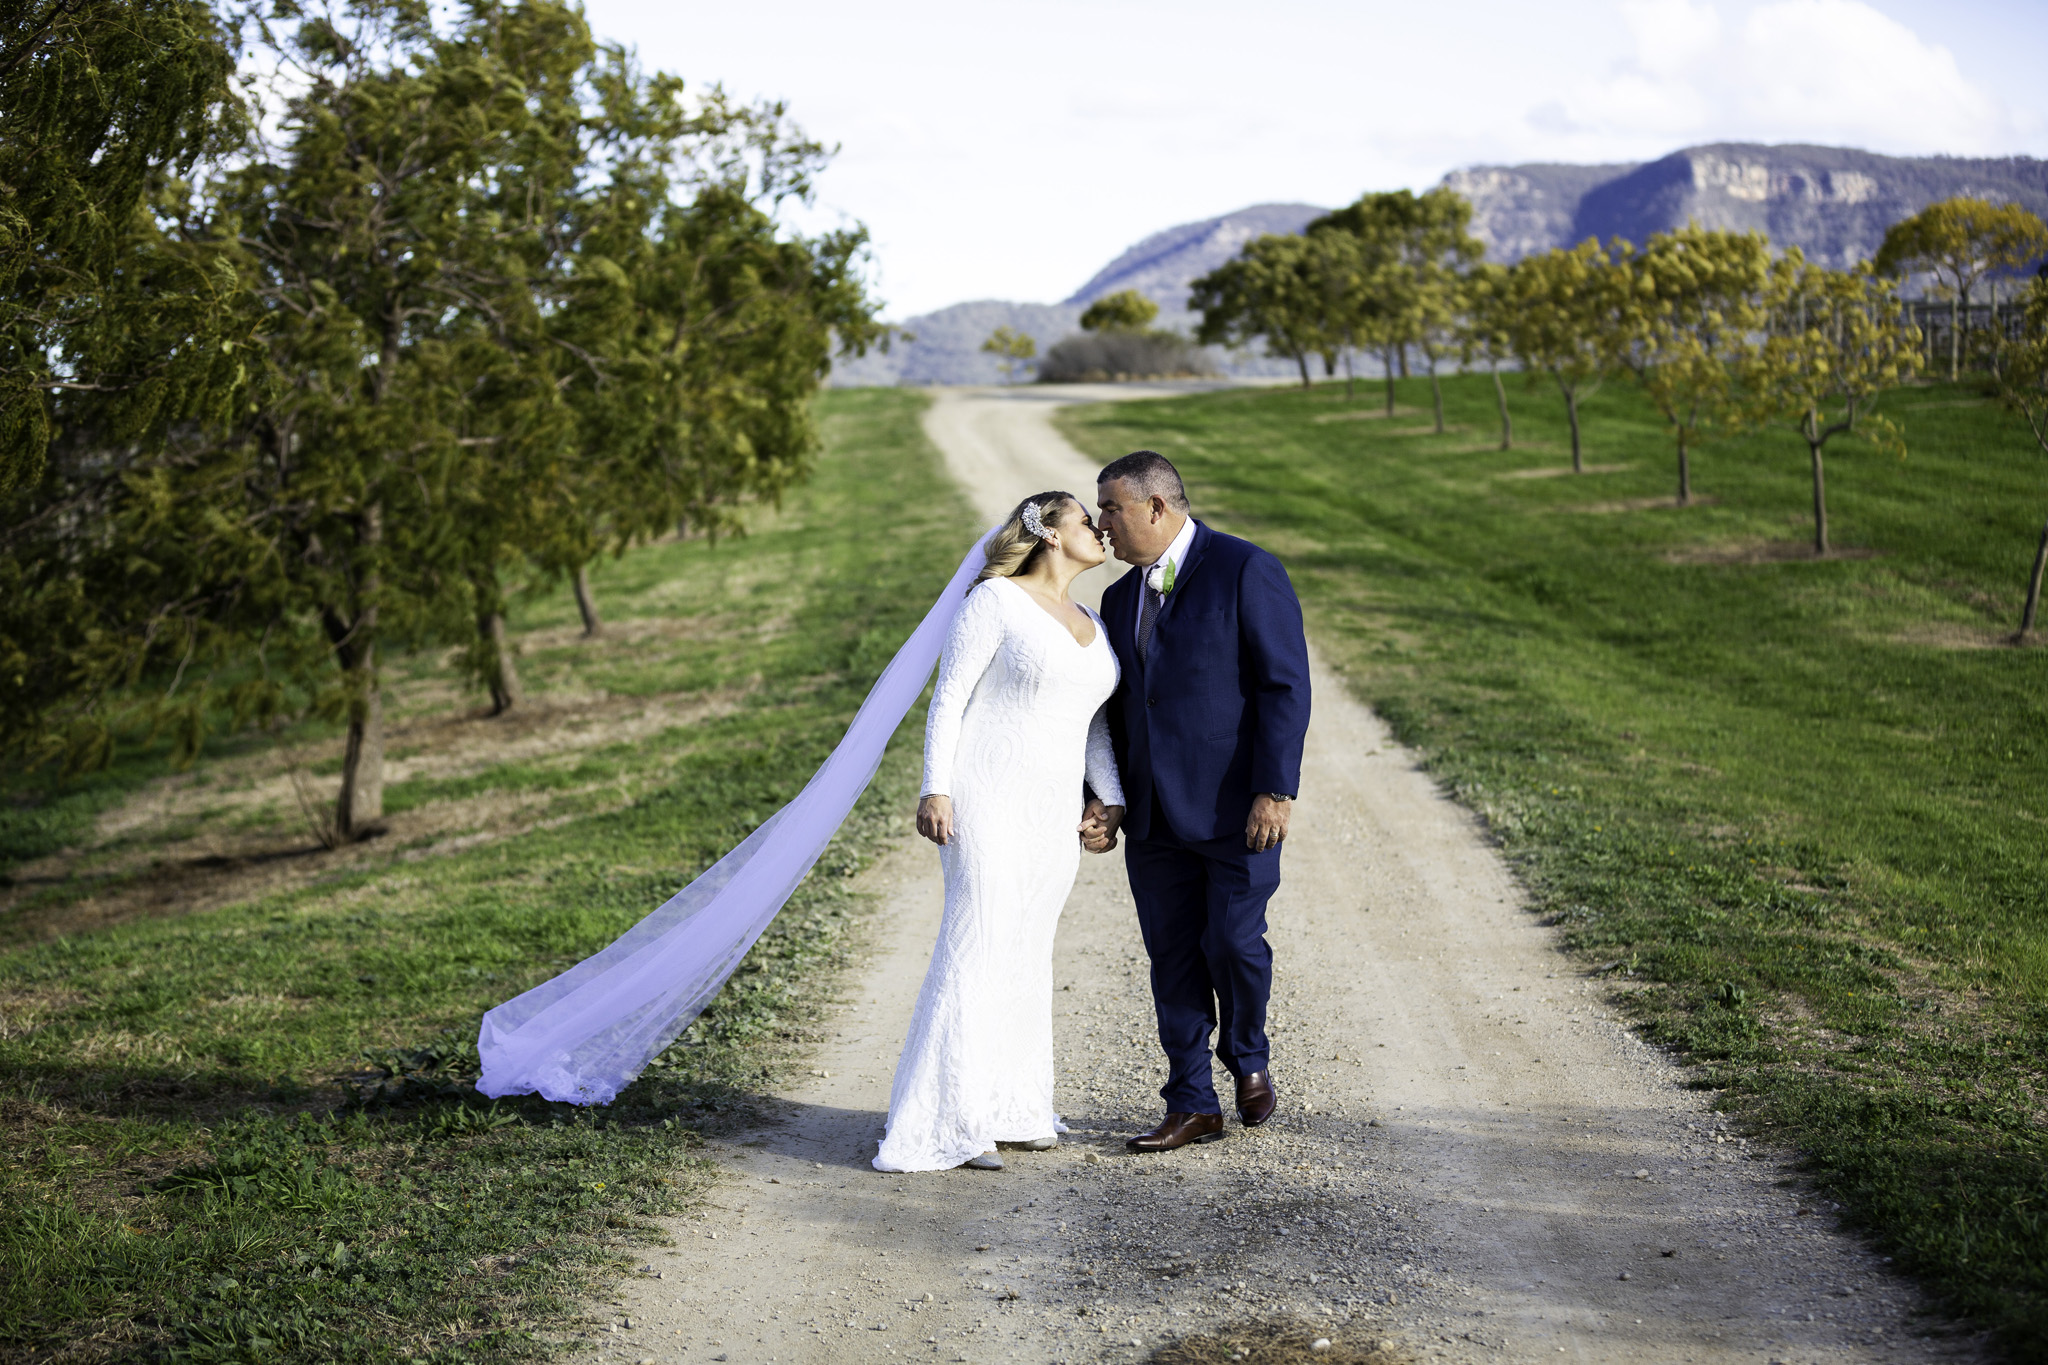 ArtyJ Photography | Hunter Valley Wedding Photographer, Elope, Elope in the Vines, Worthingtons Vineyard, Elopement, Winter Elopement, Country Elopement Packages NSW, Pokolbin, Hunter Valley Elopement, Australia, Elope Hunter Valley, NSW, Hunter Valley Trish Wise | Sian & John | Elopement